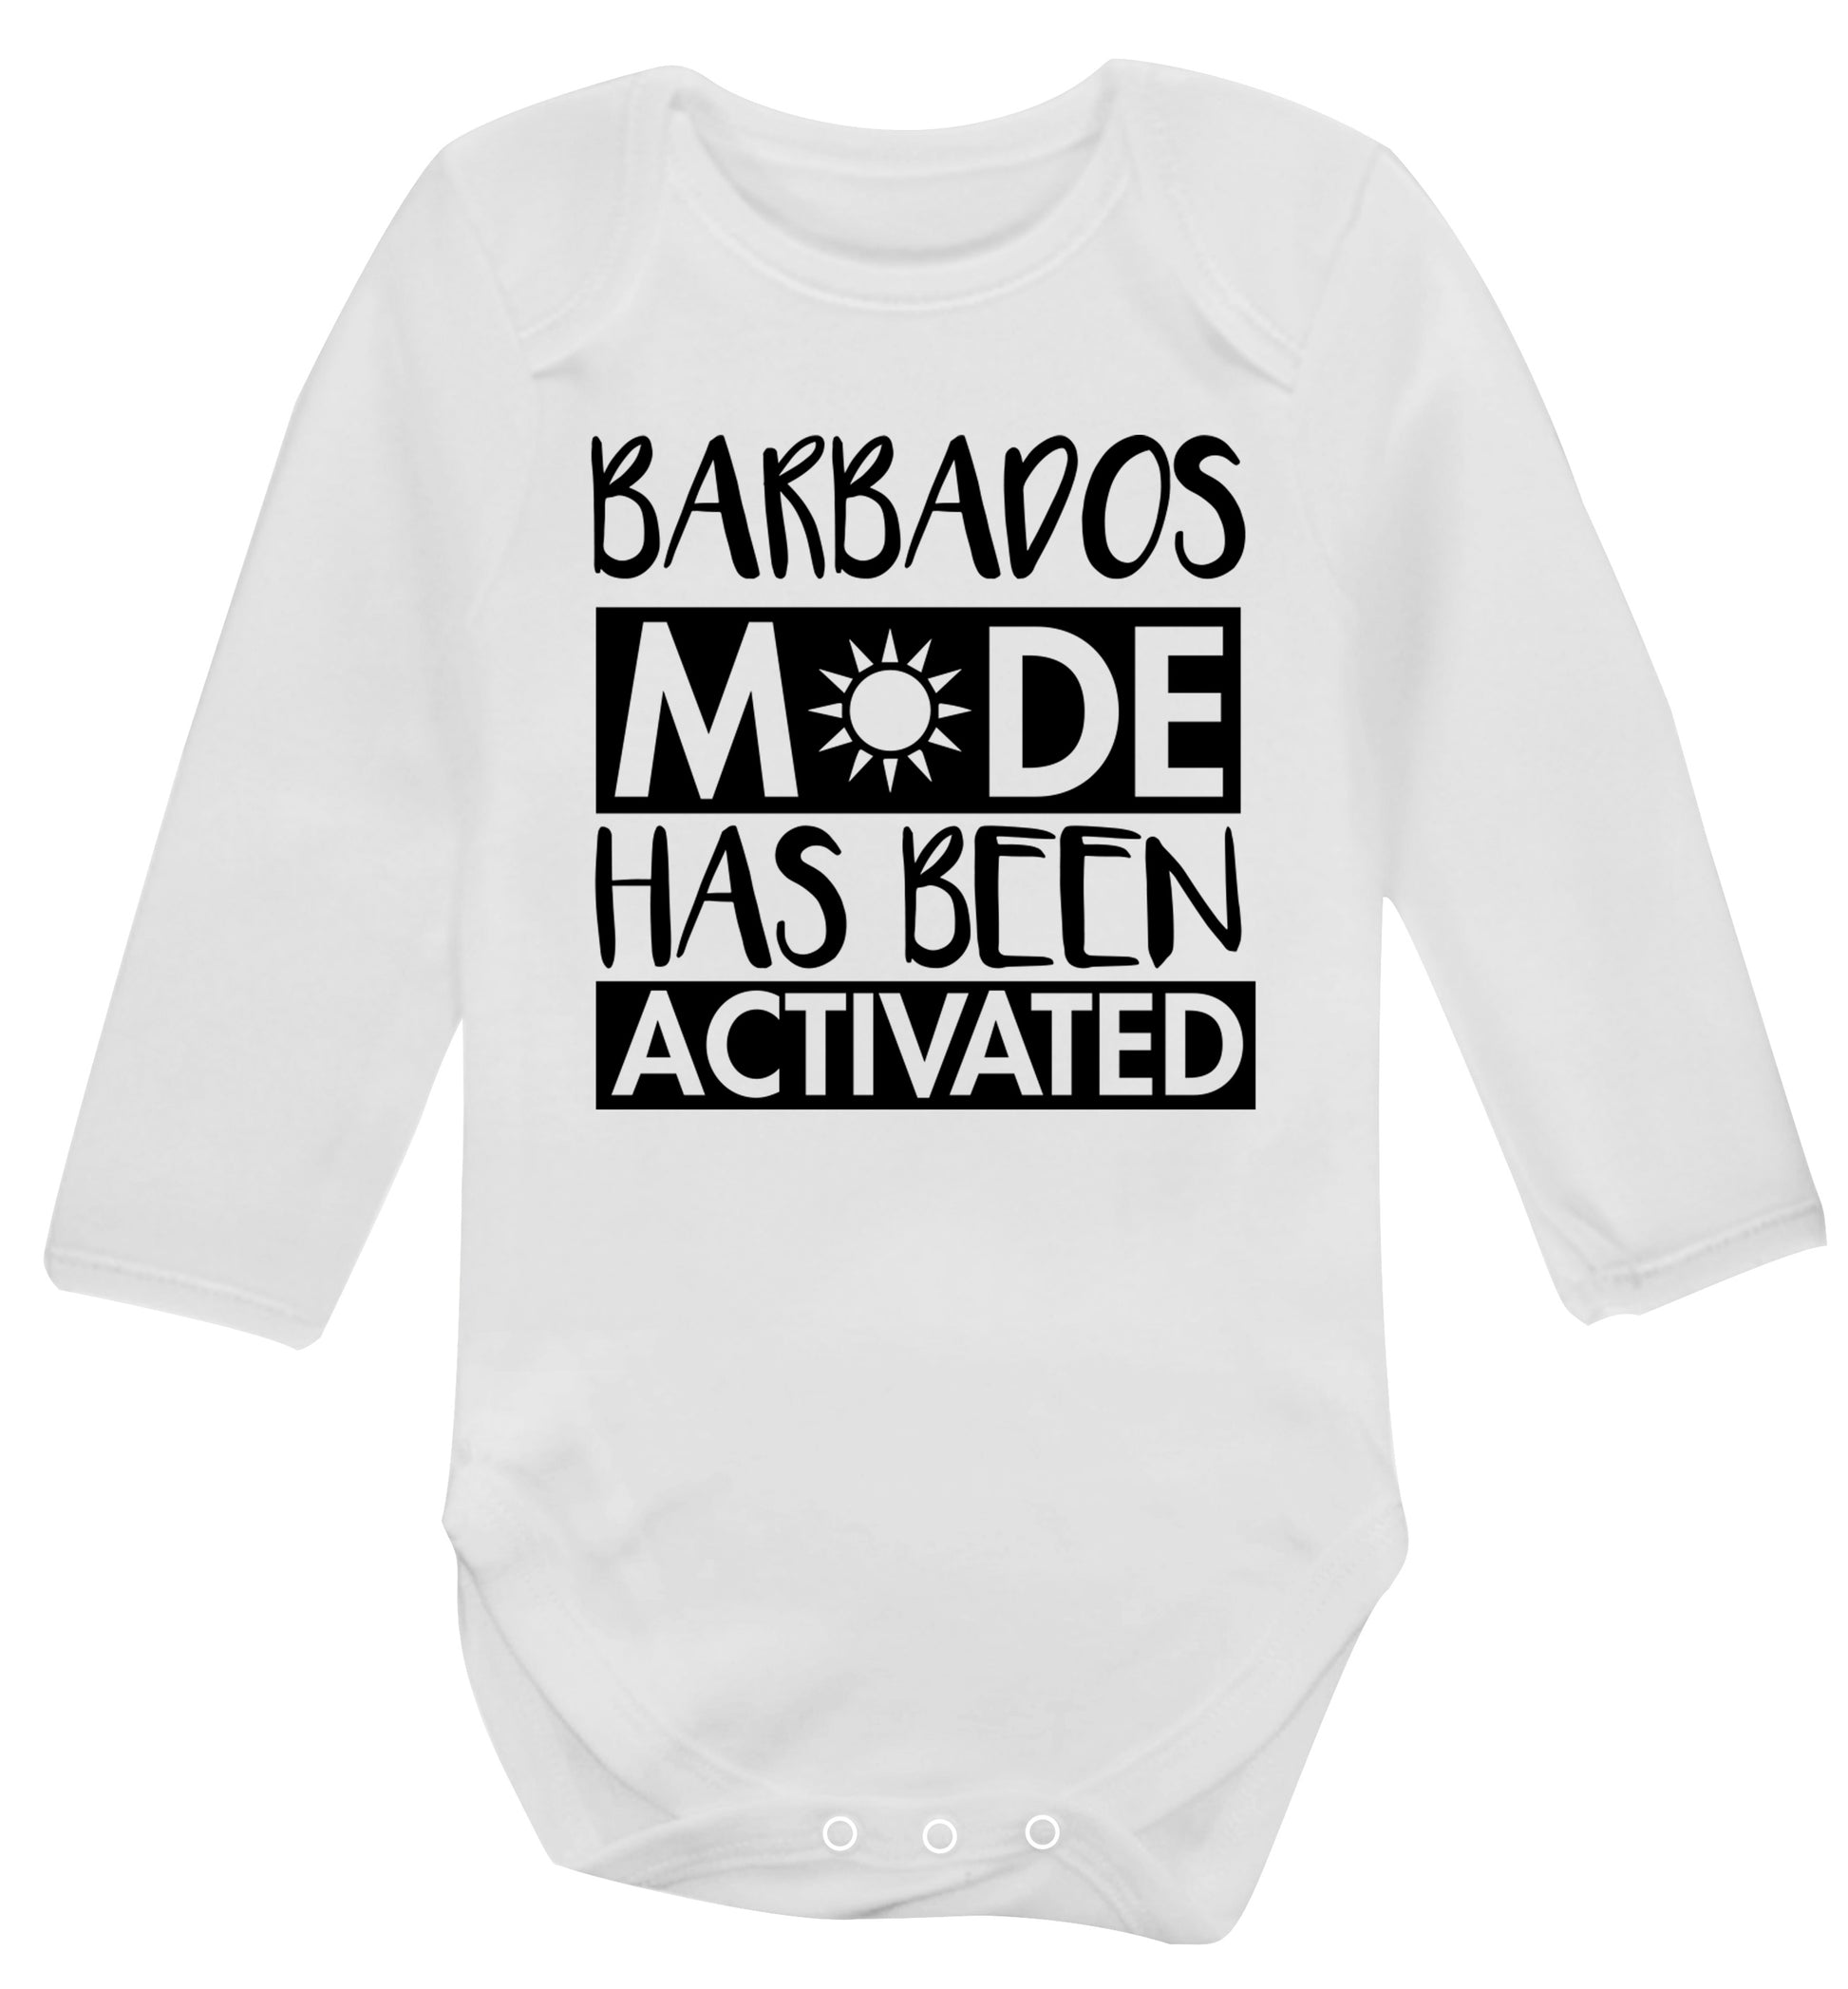 Barbados mode has been activated Baby Vest long sleeved white 6-12 months